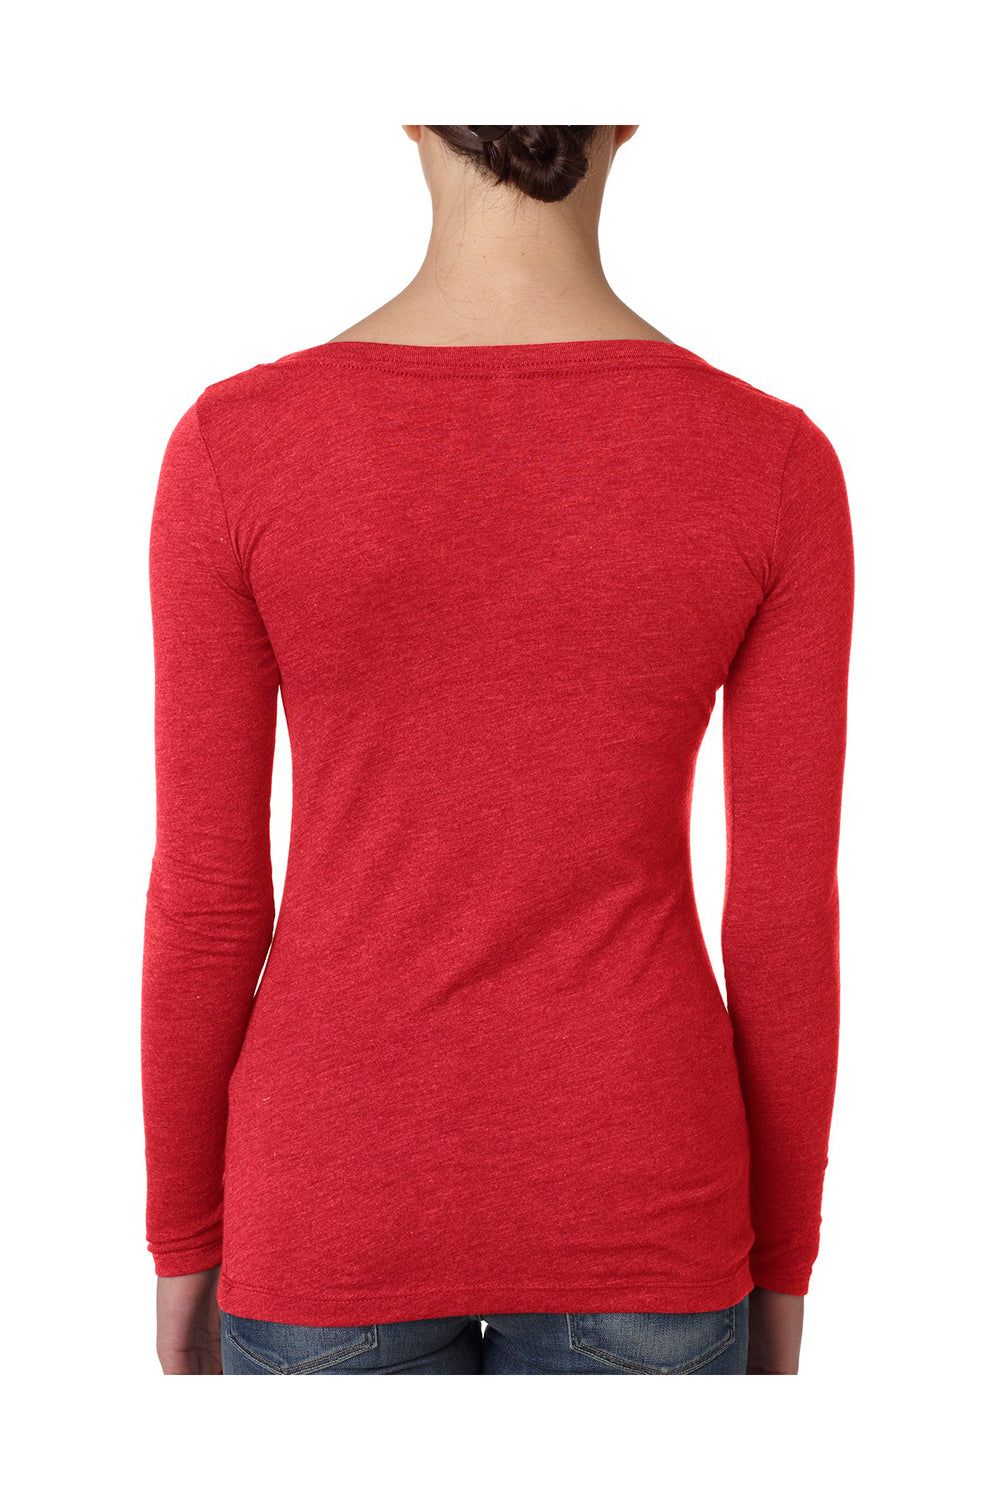 Next Level 6731 Womens Jersey Long Sleeve Scoop Neck T-Shirt Red Back